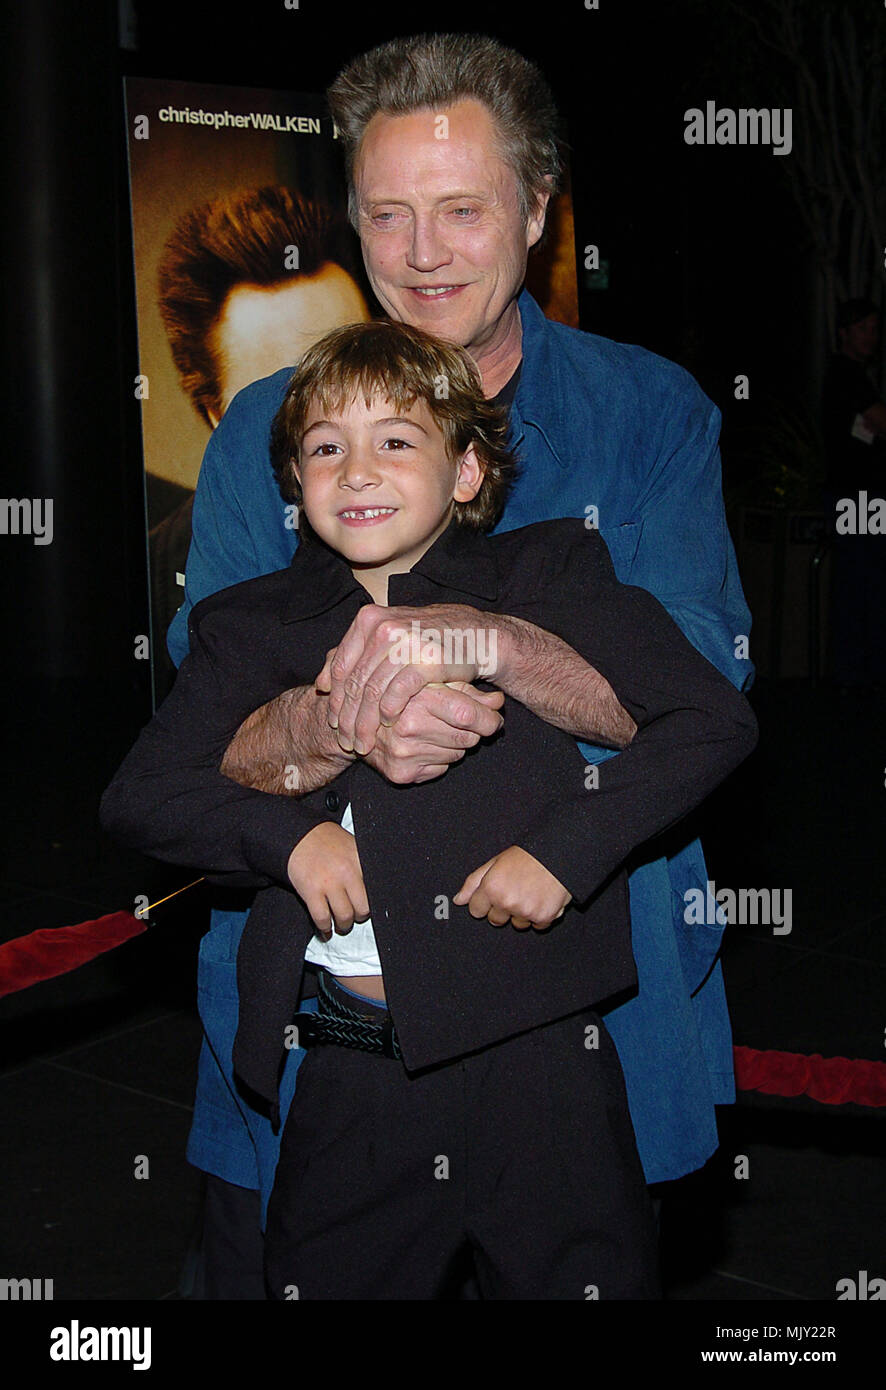 Christopher Walken and Jonah Bobo  arriving at the Around The Bend premiere at the Director Guild Theatre in Los Angeles. September 21, 2004.          -            0WalkenChristopher BoboJ006.JPG           -              0WalkenChristopher BoboJ006.JPG0WalkenChristopher BoboJ006  Event in Hollywood Life - California,  Red Carpet Event, Vertical, USA, Film Industry, Celebrities,  Photography, Bestof, Arts Culture and Entertainment, Topix Celebrities fashion /  from the Red Carpet-, Vertical, Best of, Hollywood Life, Event in Hollywood Life - California,  Red Carpet , USA, Film Industry, Celebri Stock Photo